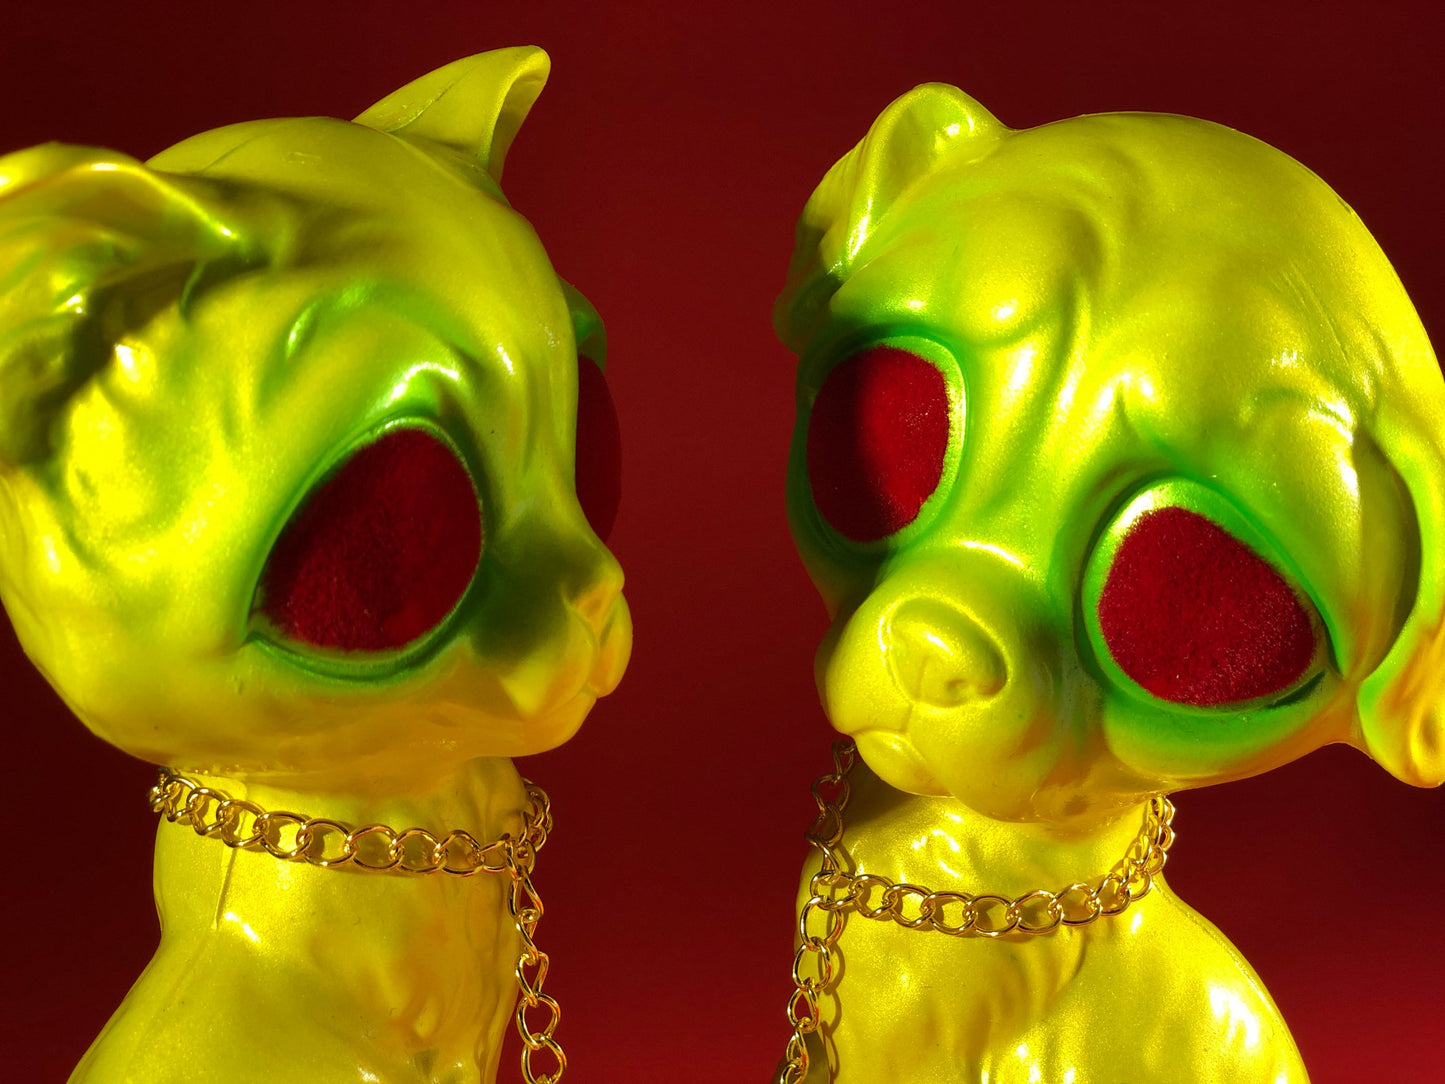 Sad dog, Sad cat chained together. Yellow and green with red flocked eyes